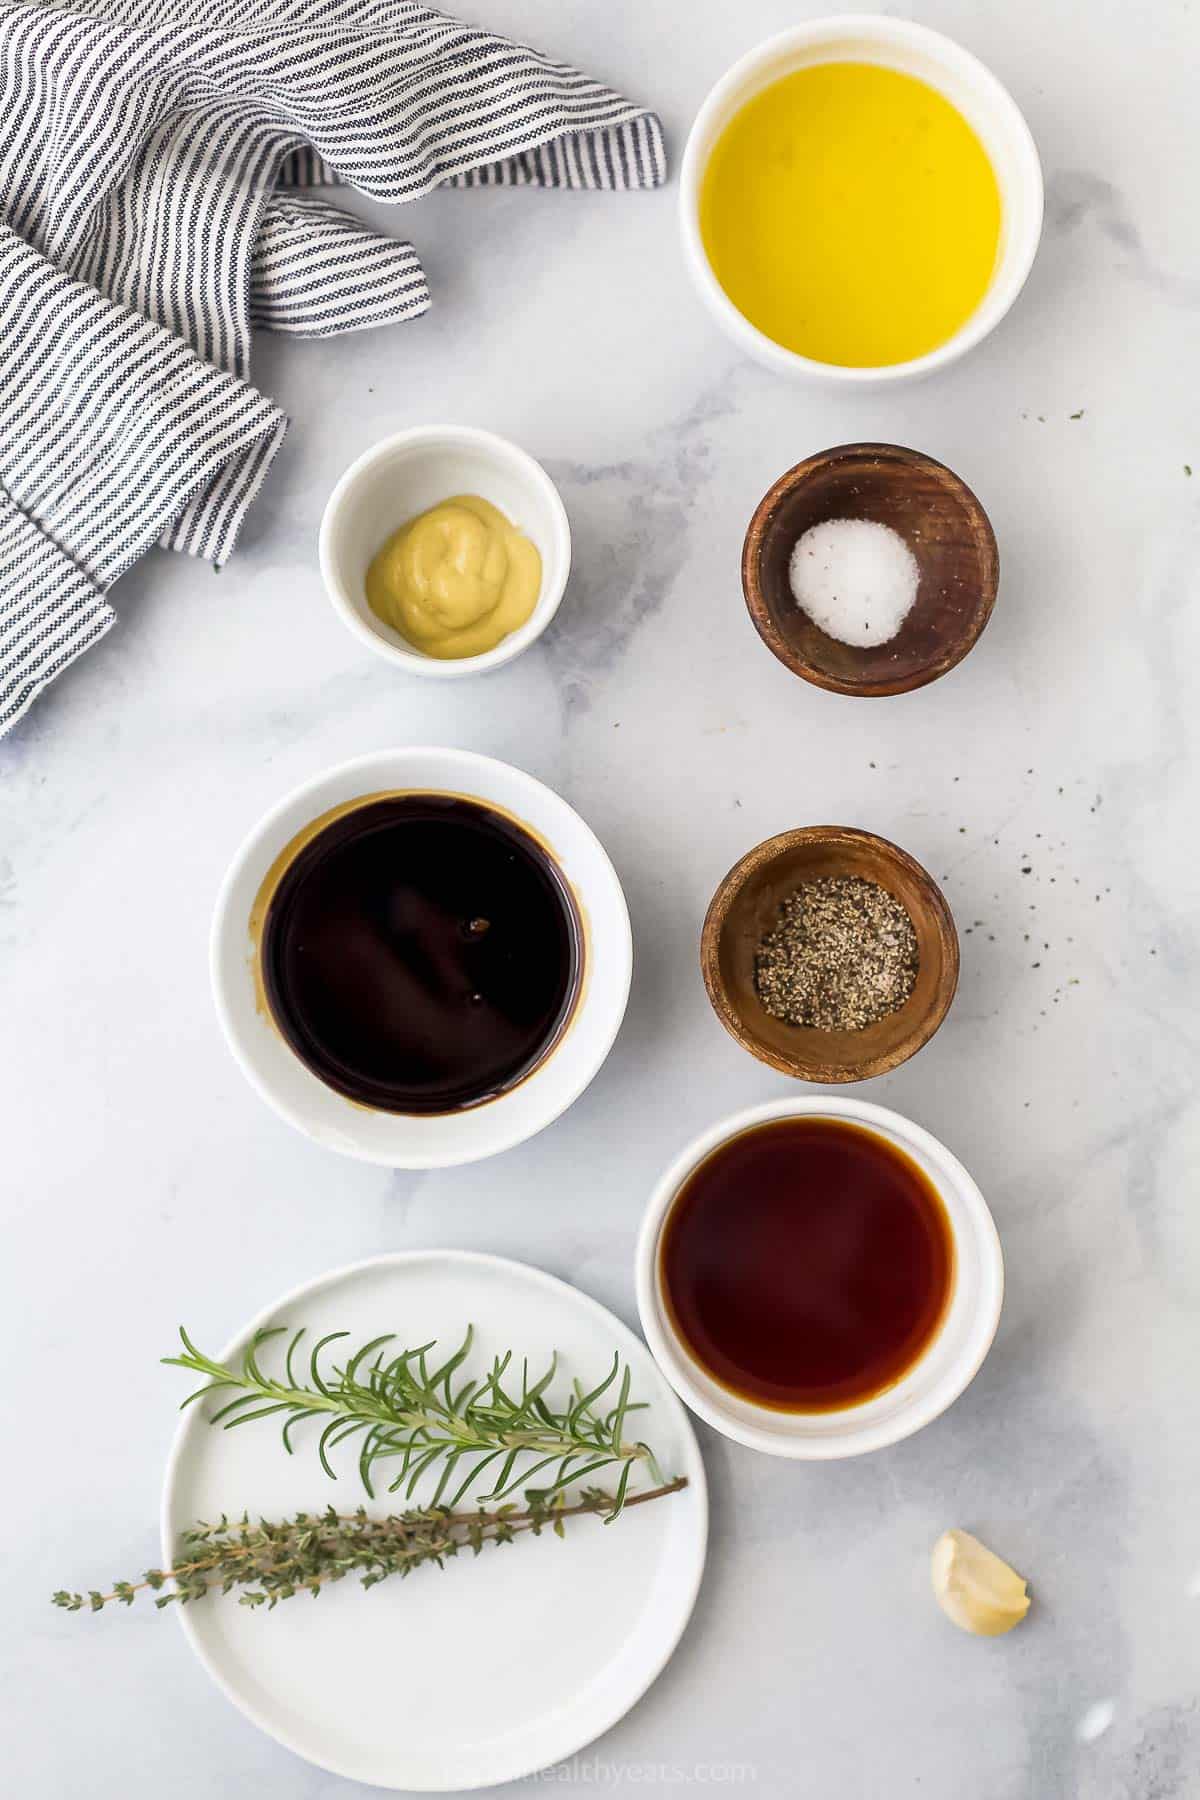 Balsamic vinegar, fresh rosemary, dijon mustard and the rest of the ingredients for the best chicken marinade on a marble countertop